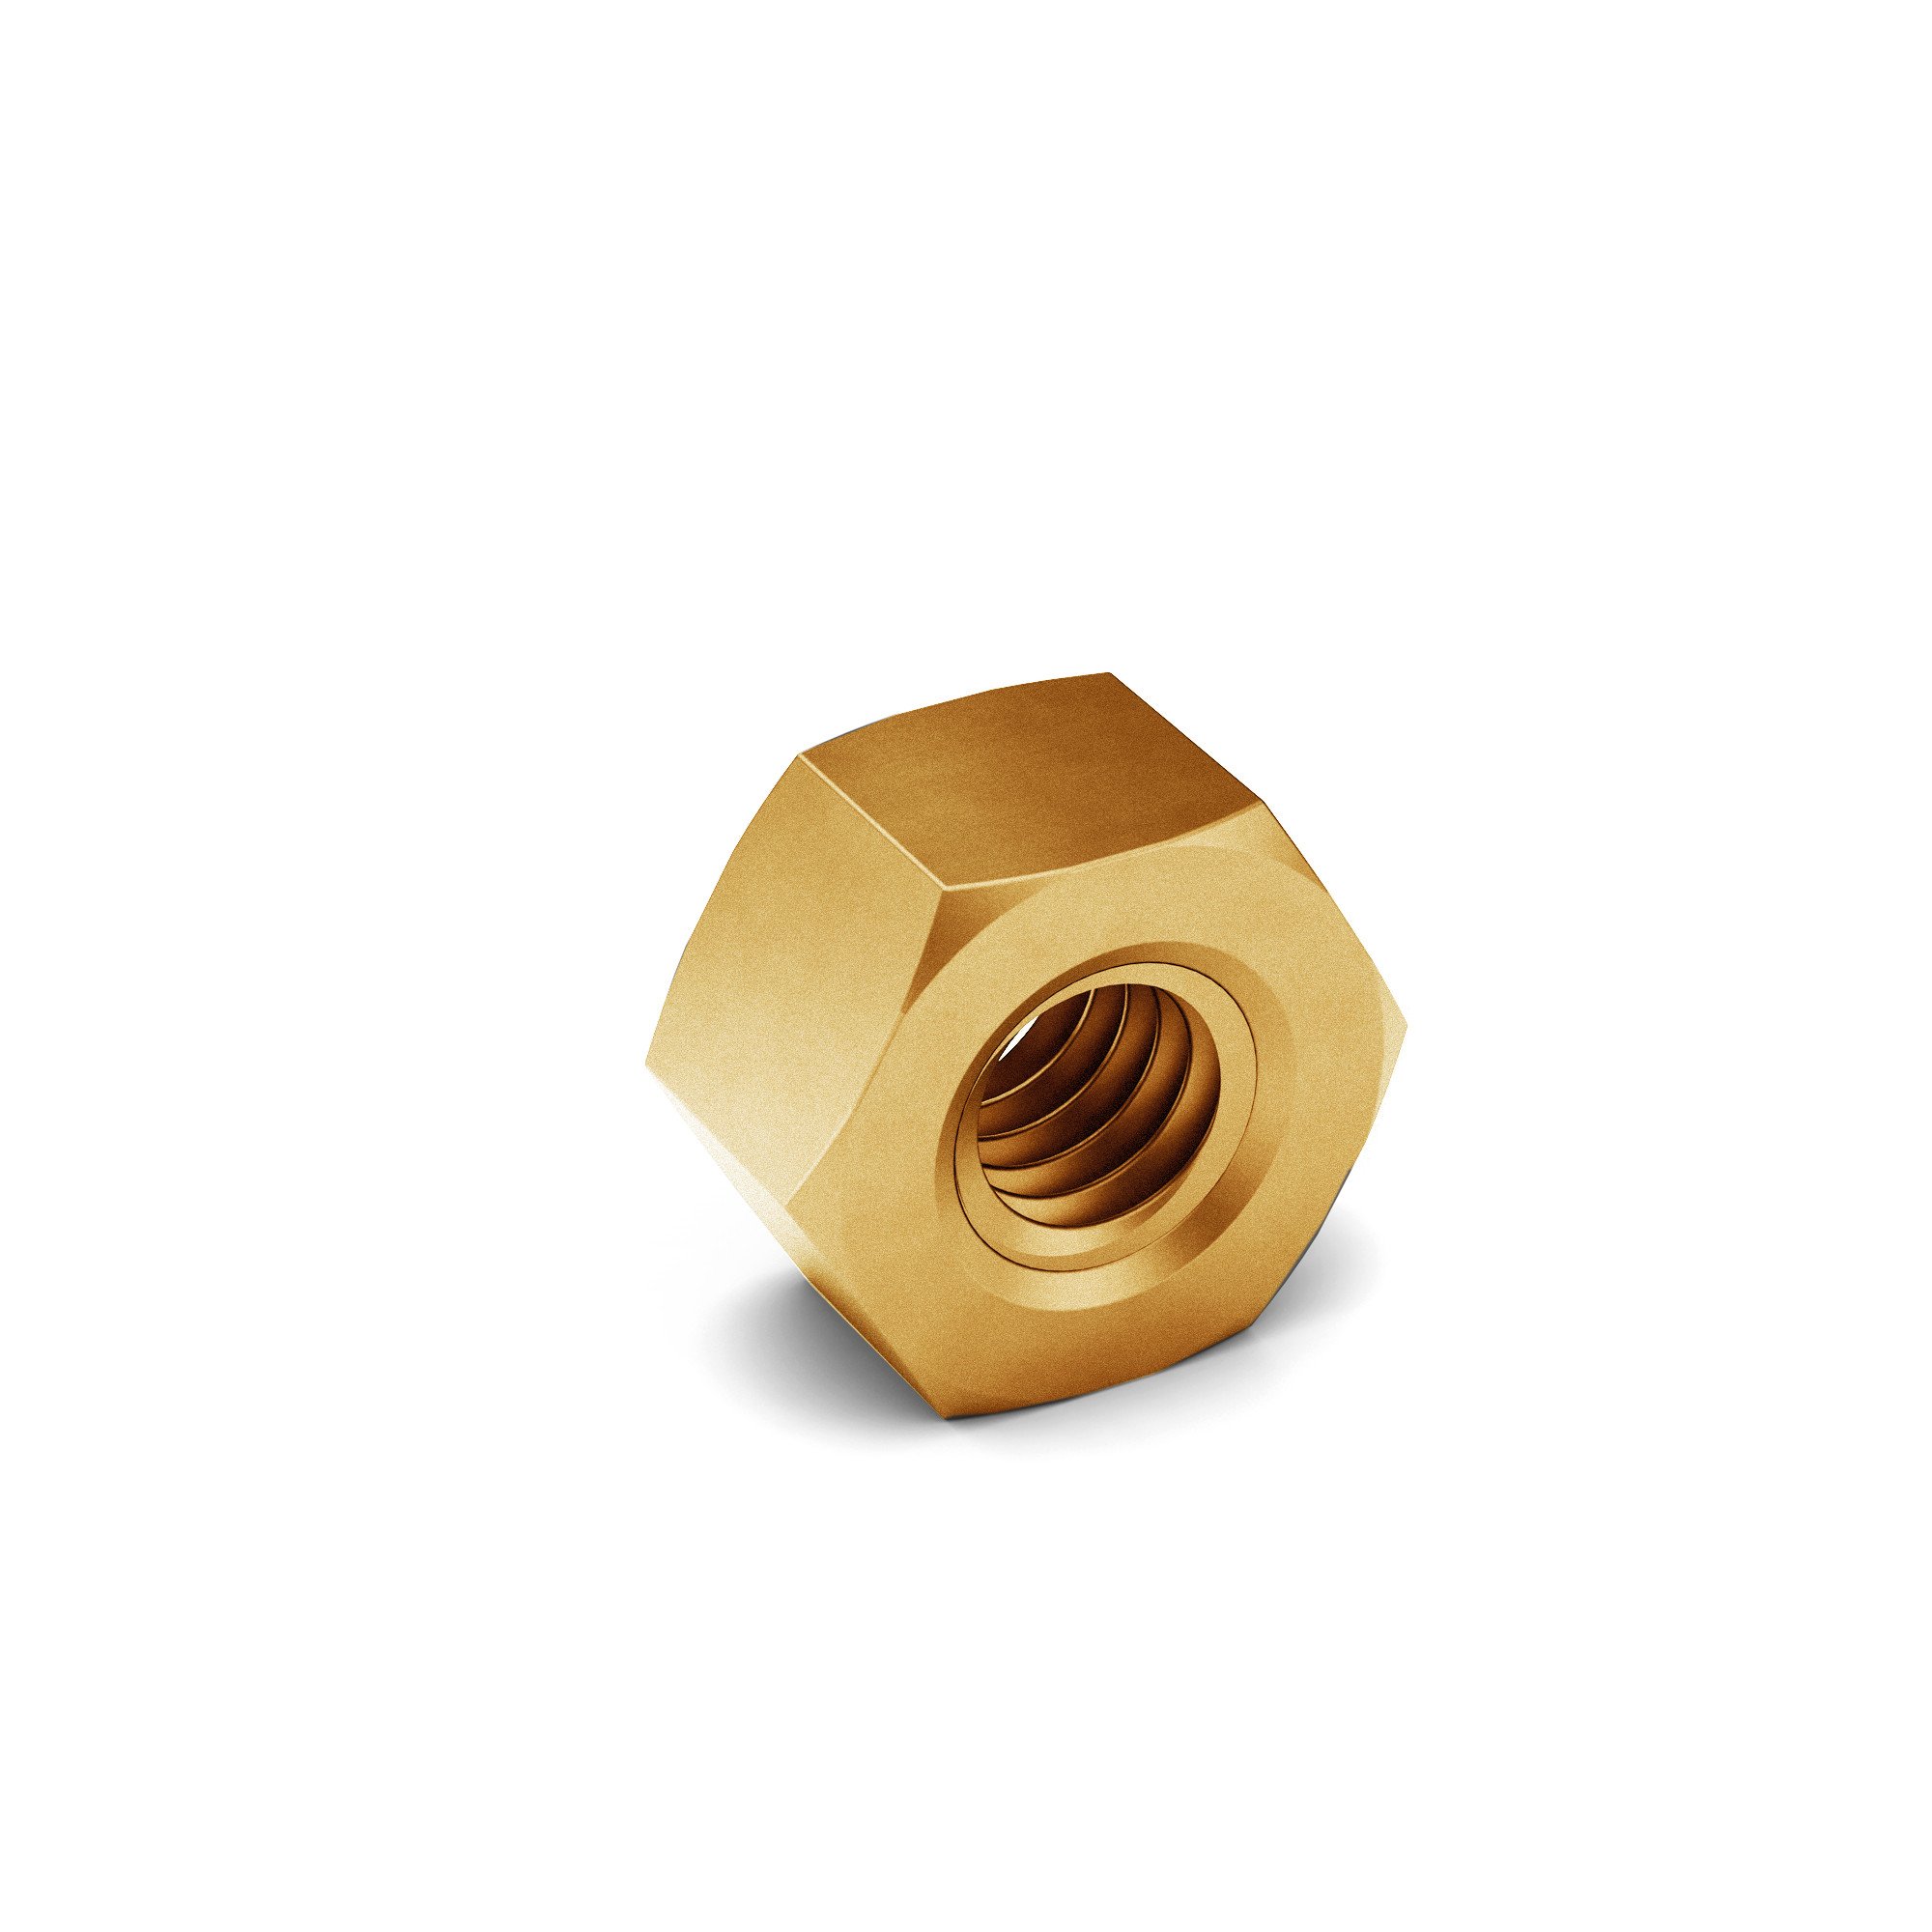 7/8-14 J995 GR 8 Hex Nut Zinc Yellow Made in USA